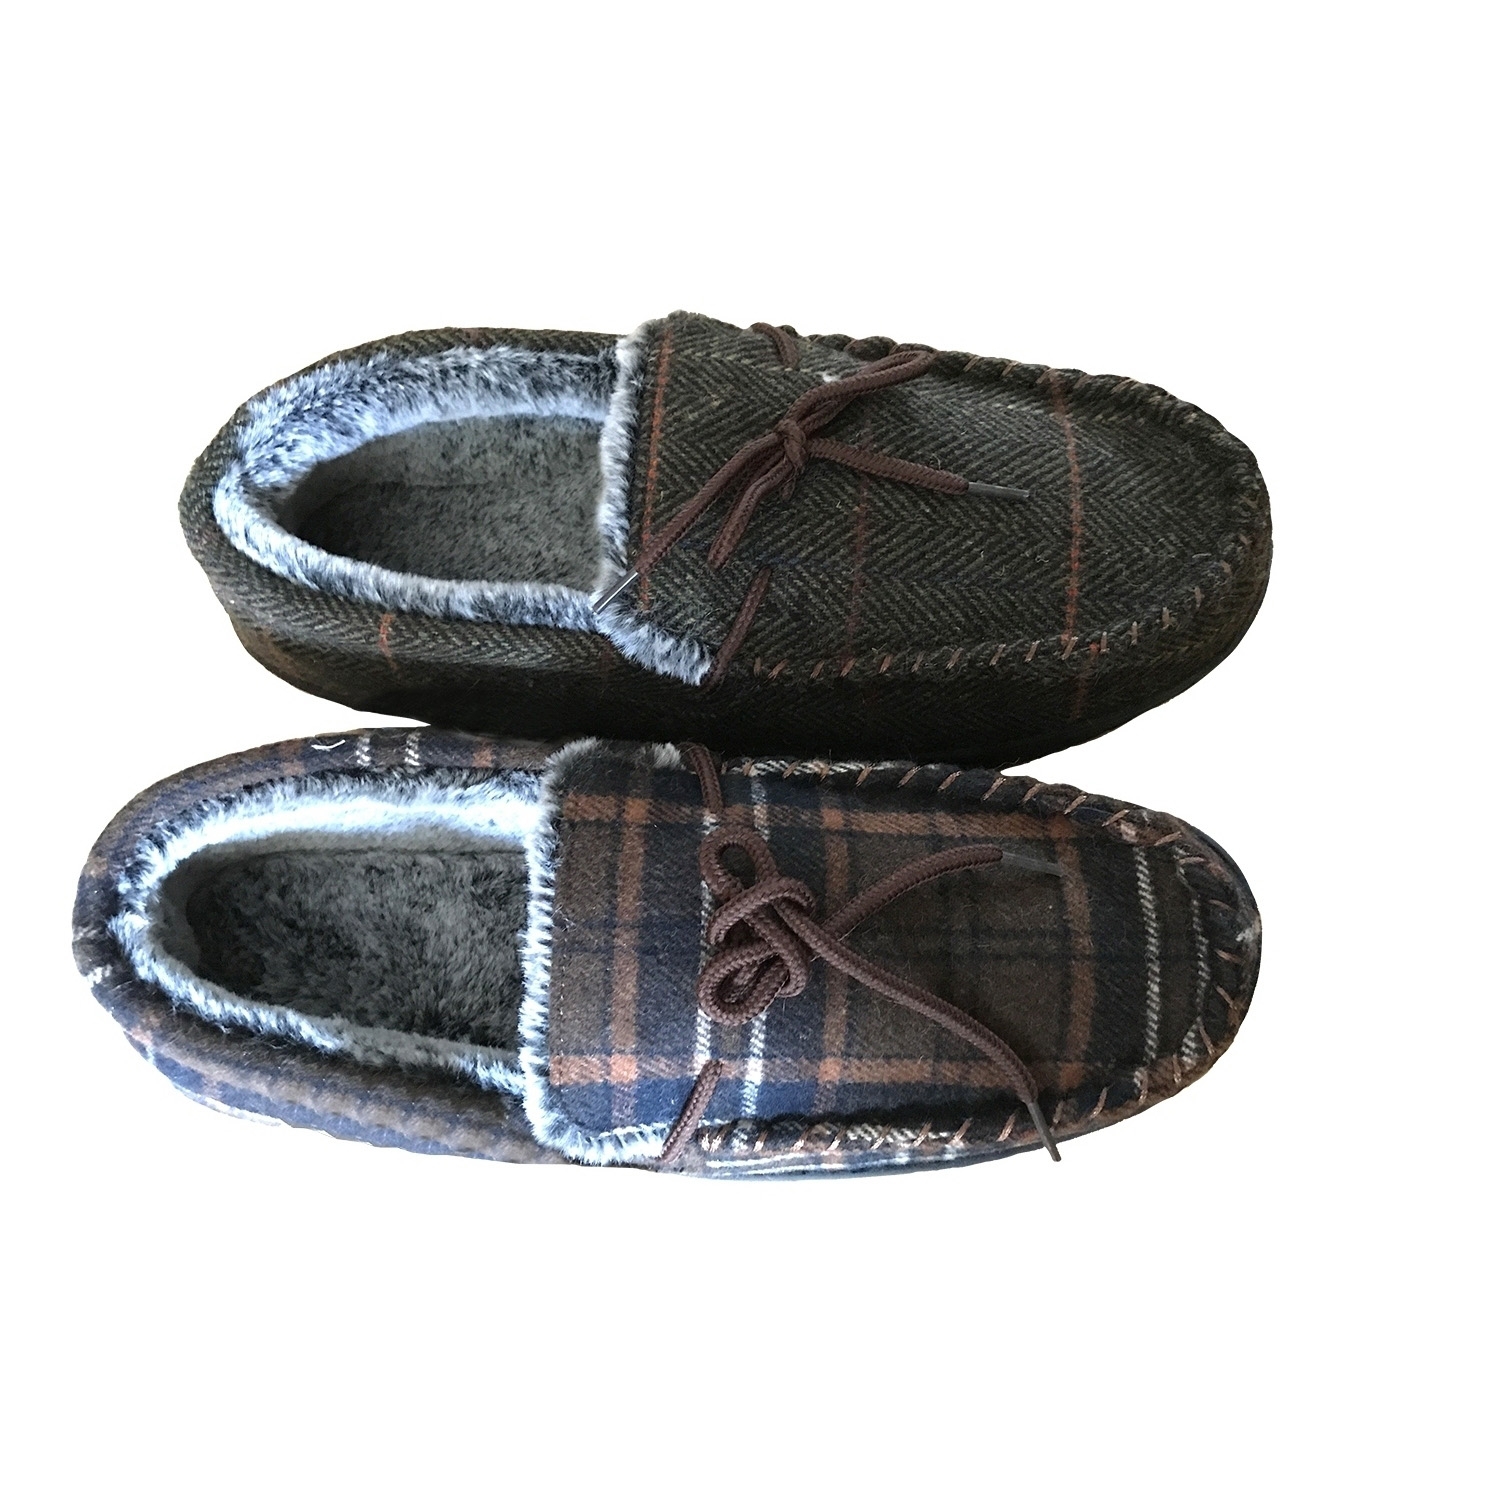 Classic Men's Loafer Slipper: A Timeless Favorite for Comfort and Style